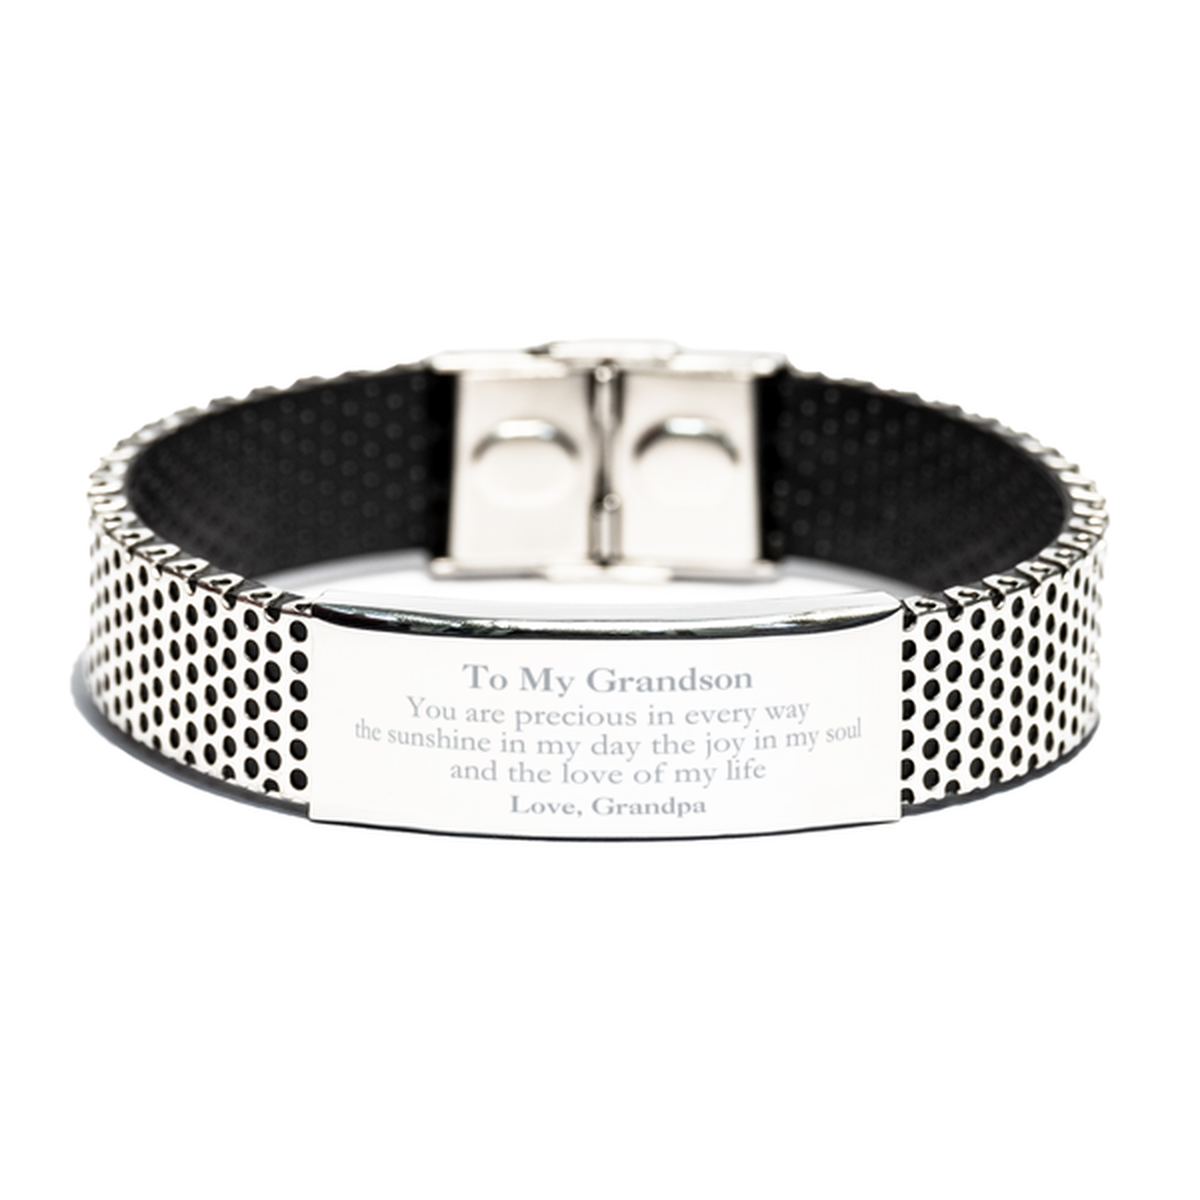 Graduation Gifts for Grandson Stainless Steel Bracelet Present from Grandpa, Christmas Grandson Birthday Gifts Grandson You are precious in every way the sunshine in my day. Love, Grandpa